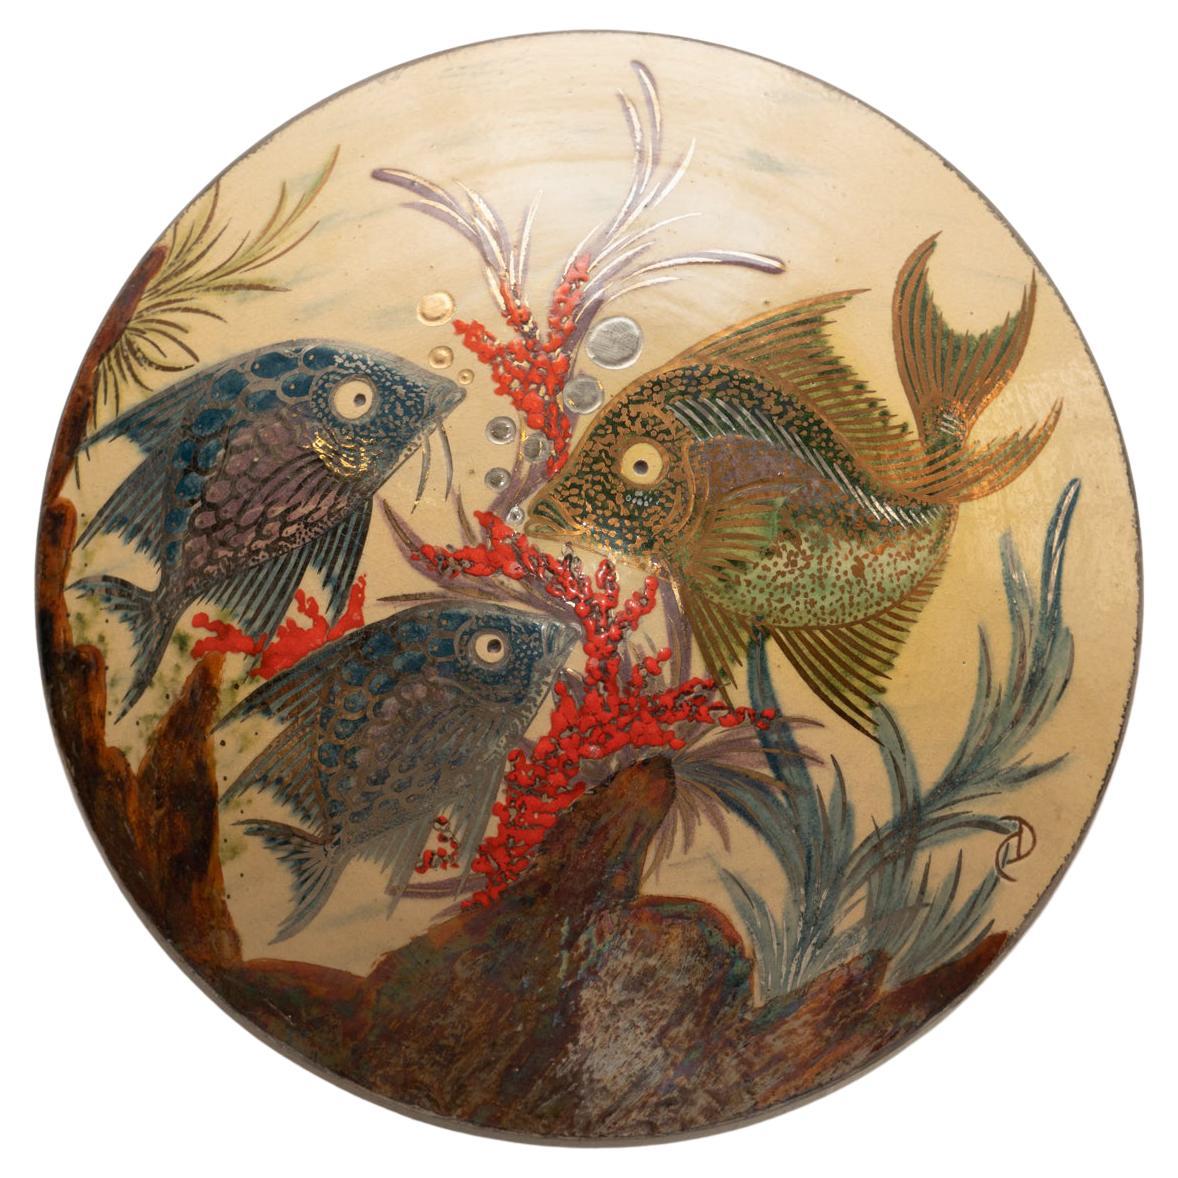 Ceramic Traditional Hand Painted Plate by Catalan Artist Diaz COSTA, circa 1960